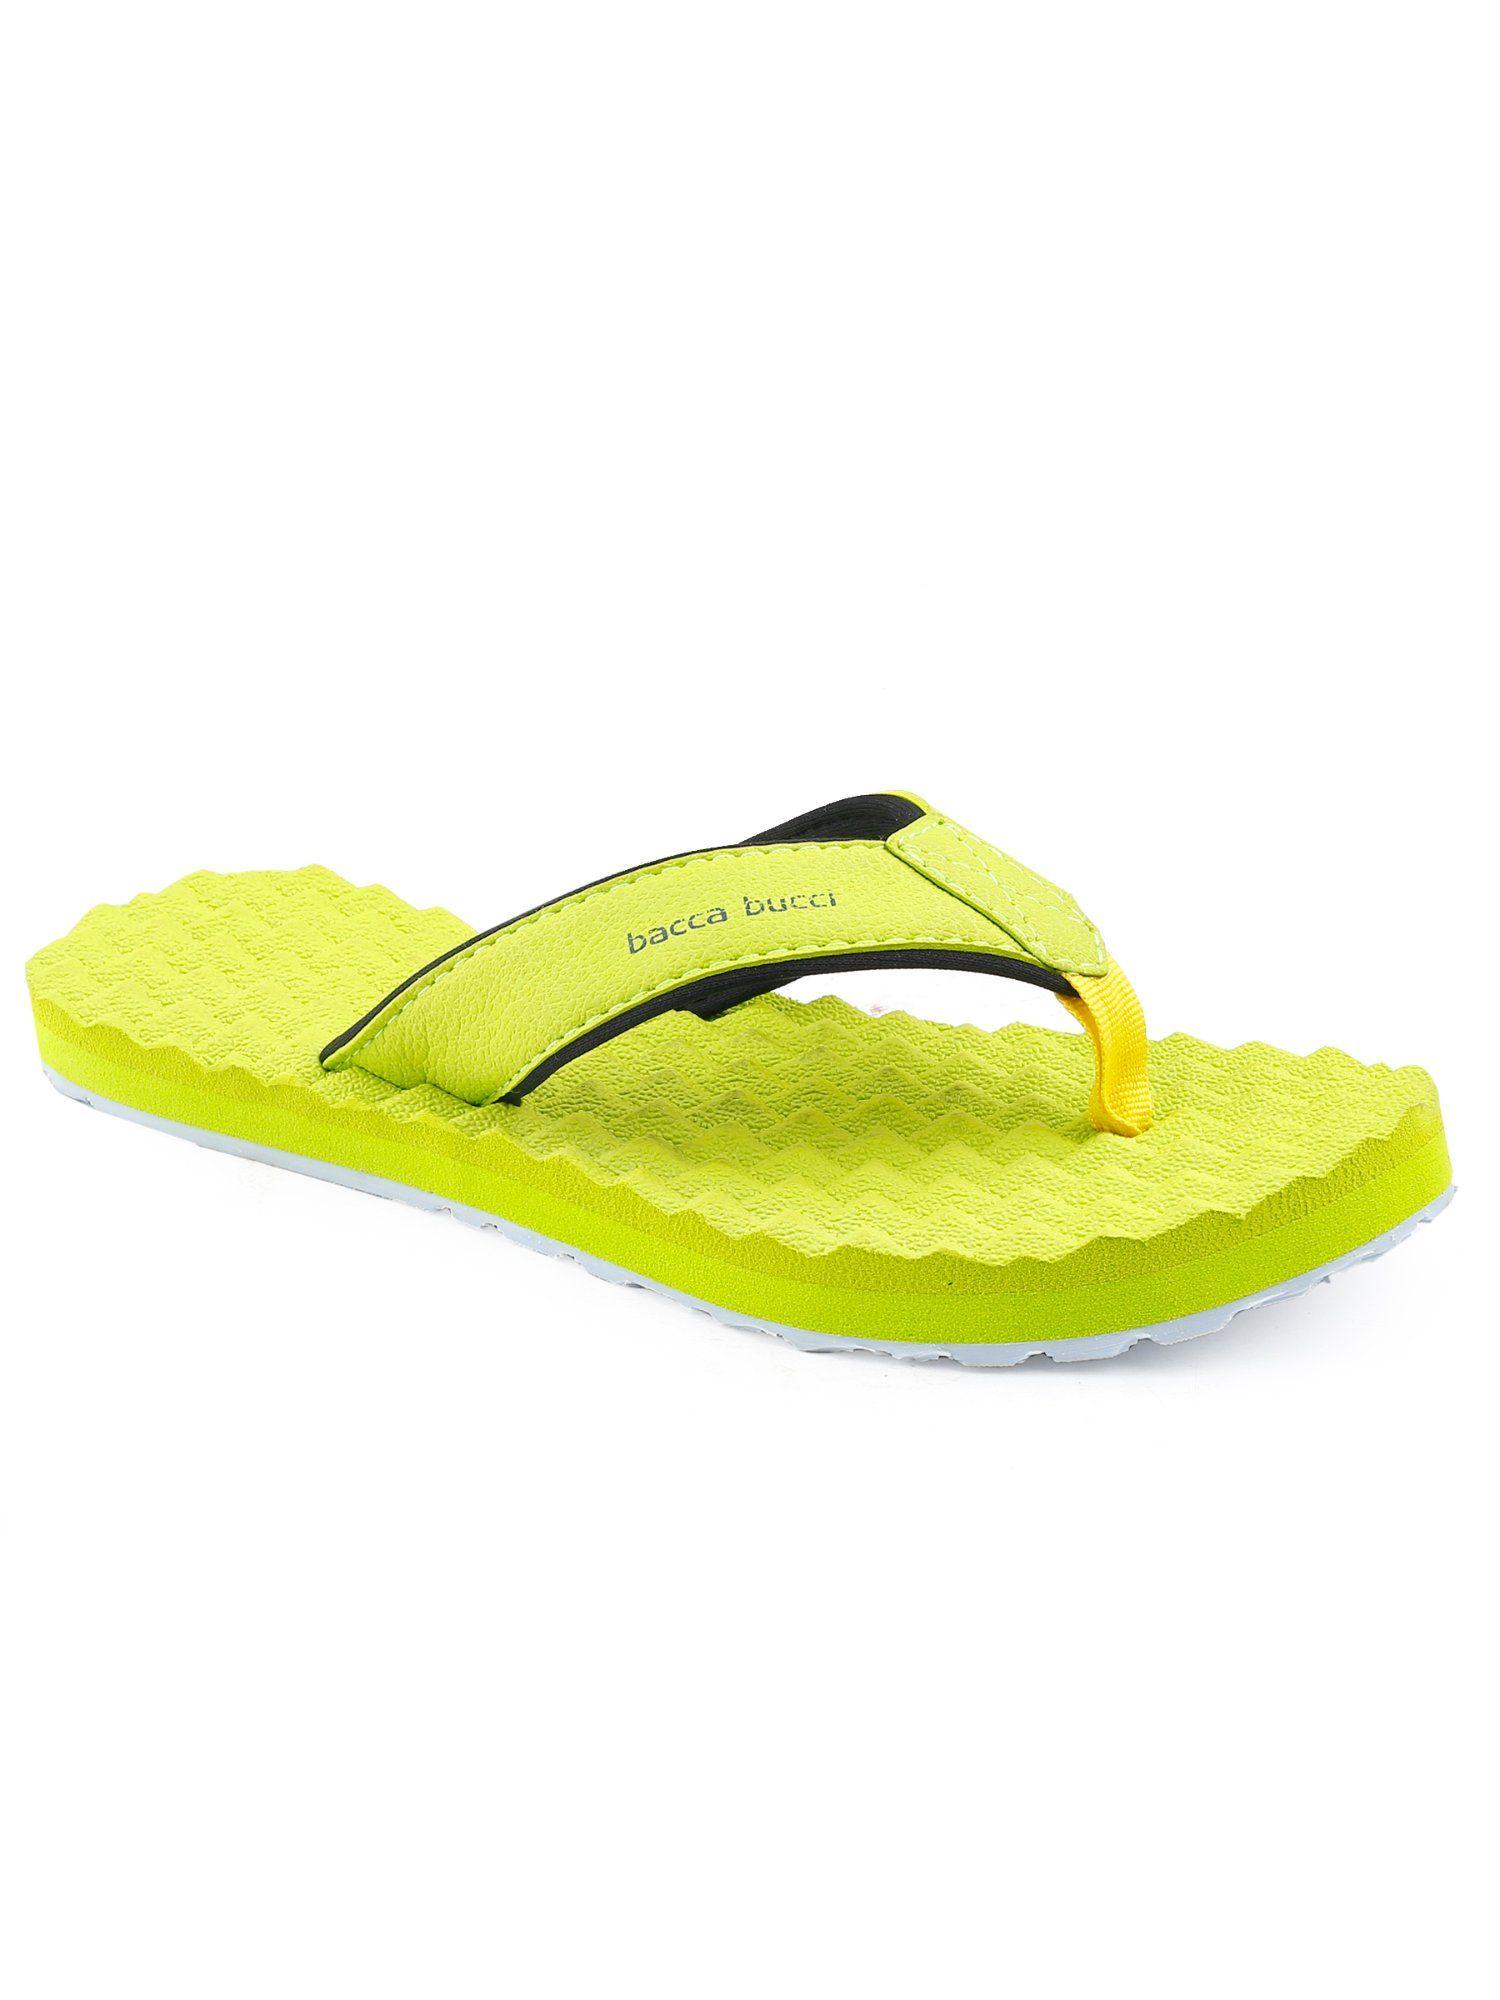 island cloud flipflops with non-slip rubber outsole-yellow